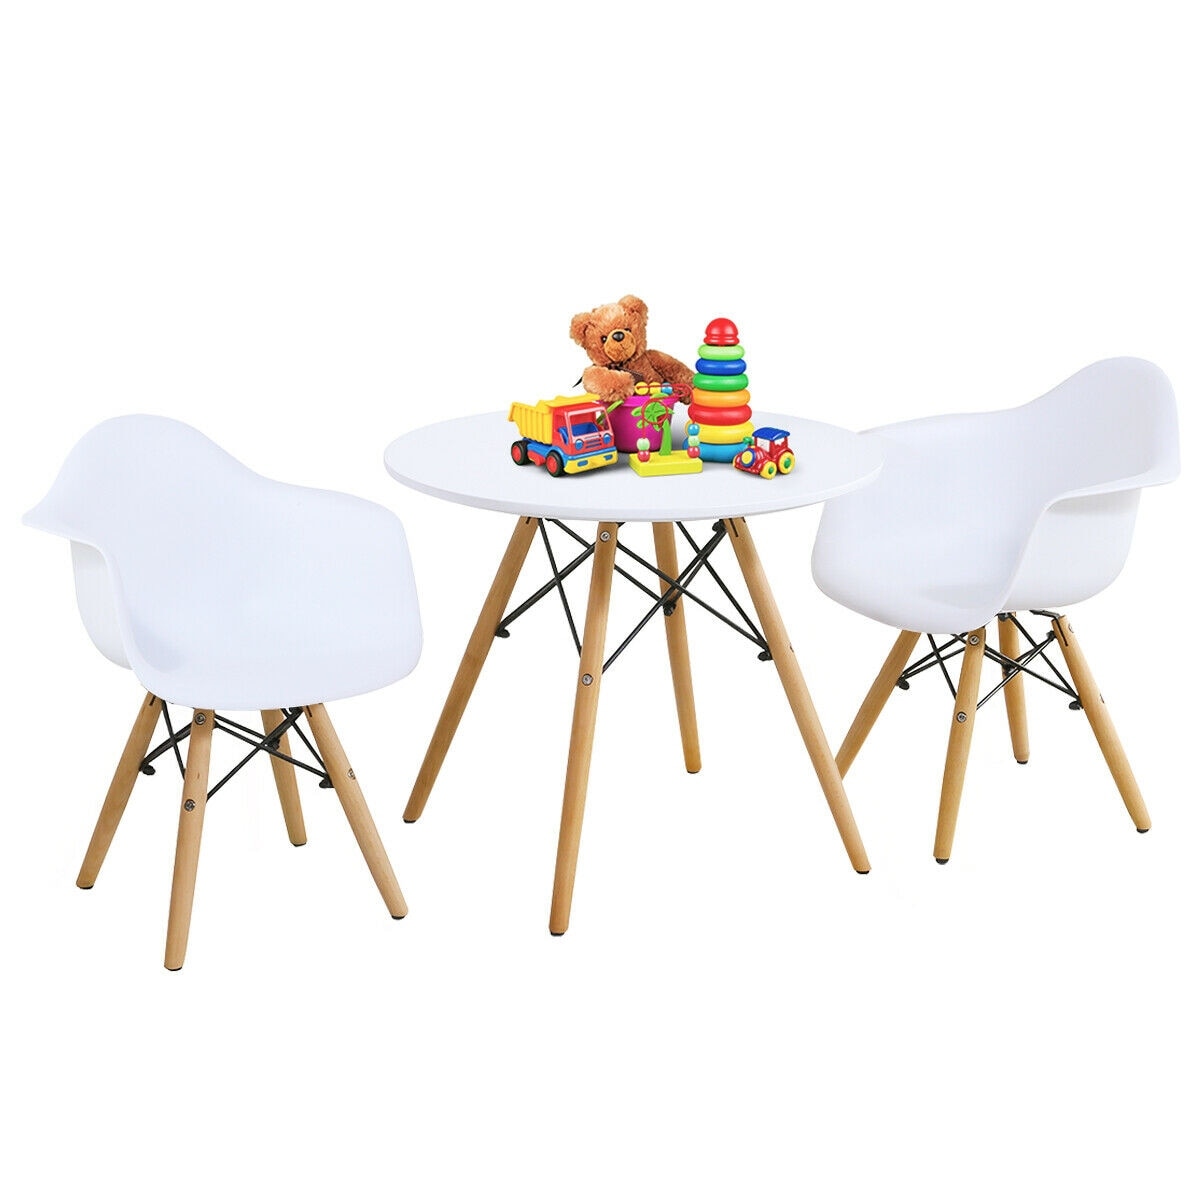 Gymax 2-in-1 Kids Wooden Art Table and Art Easel Set w/ Chairs